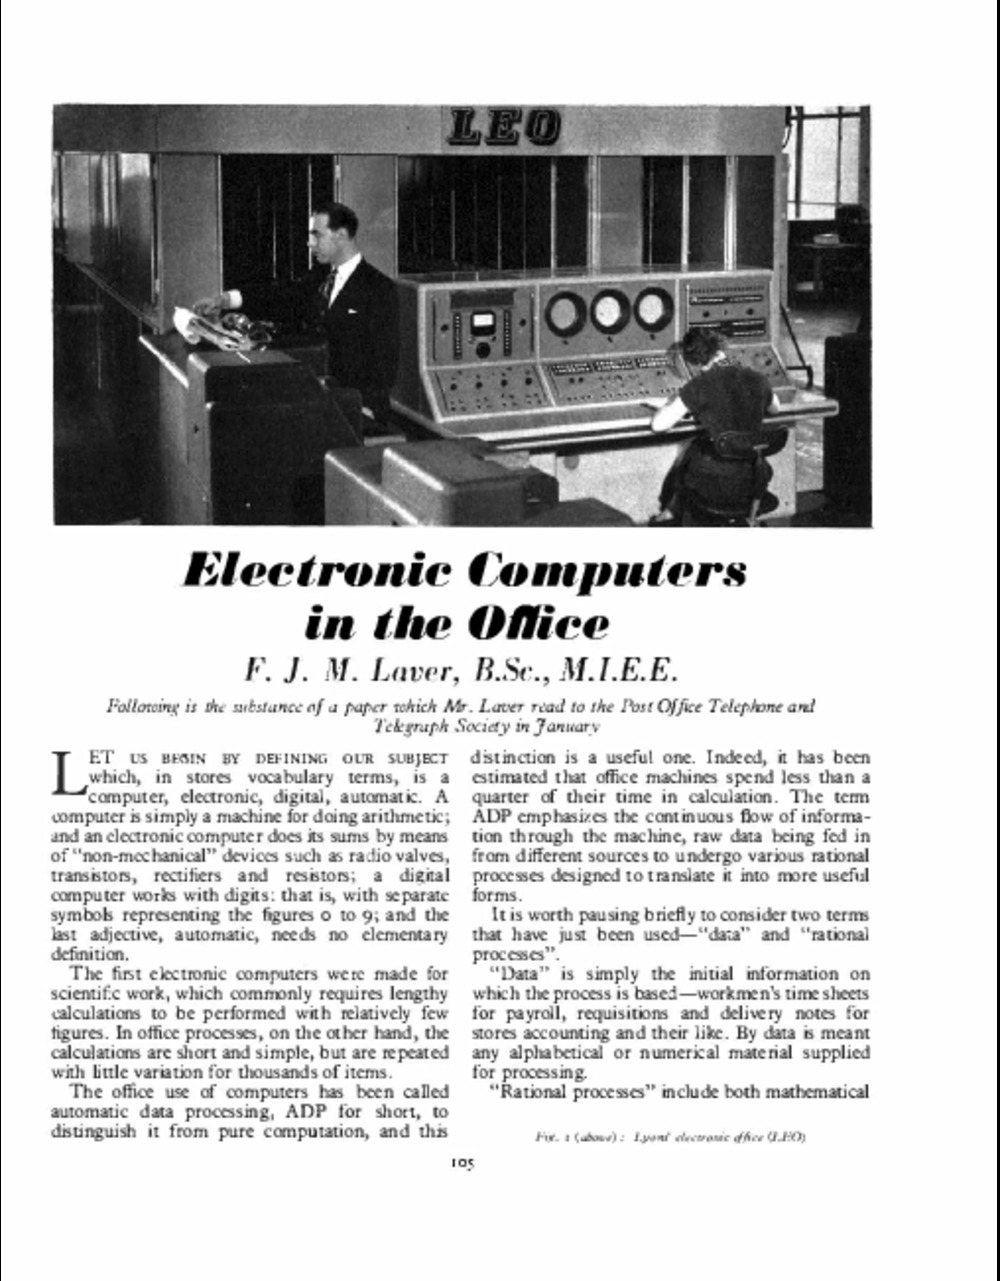 Article: Electronic Computers in the Office